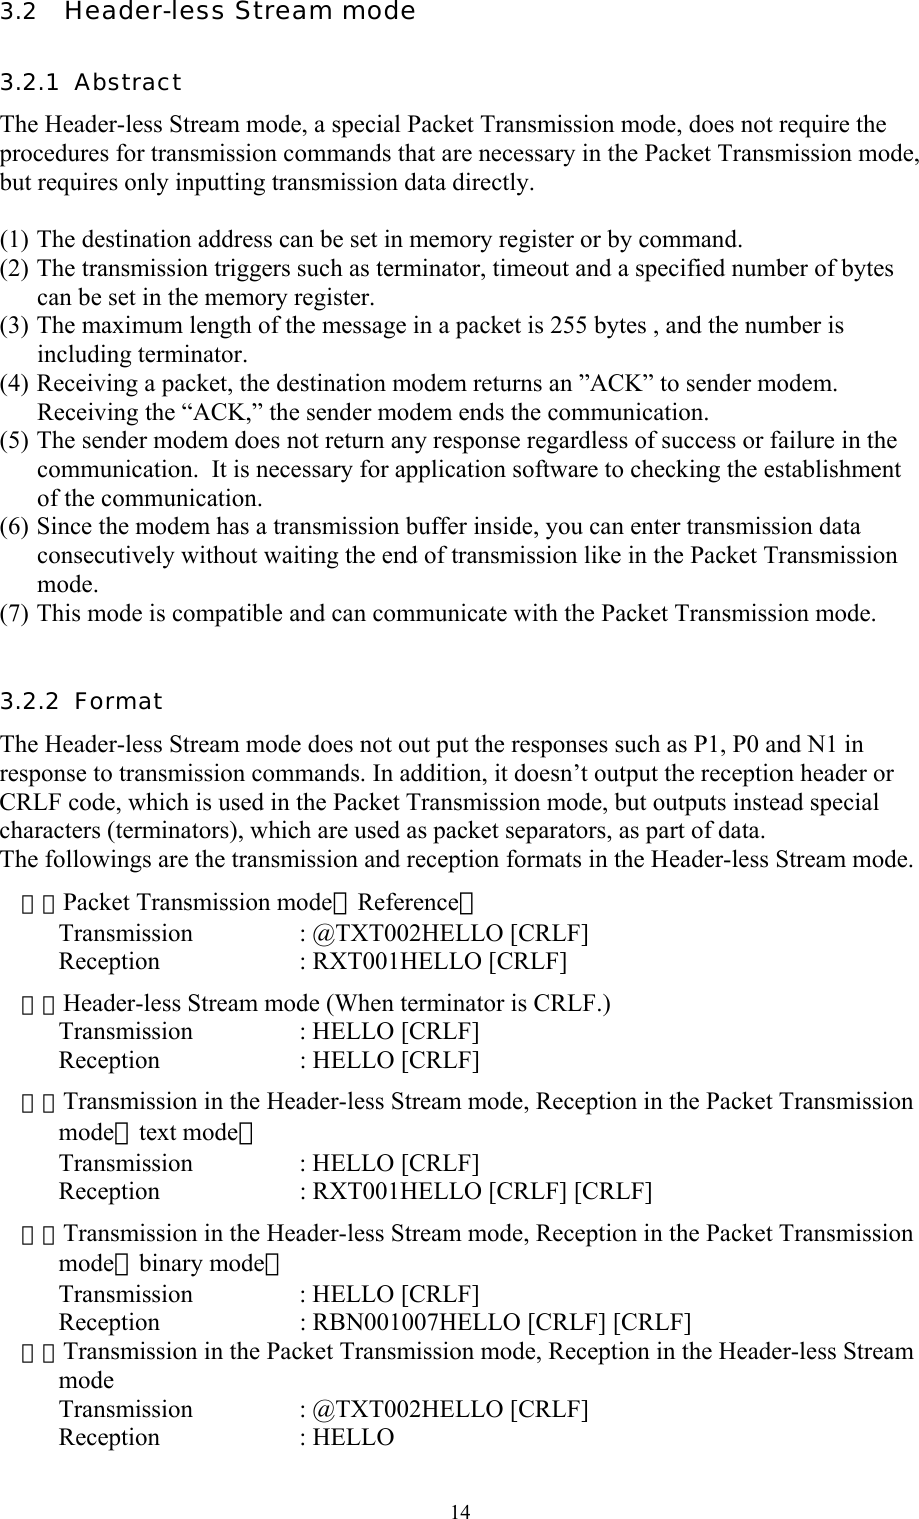  143.2   Header-less Stream mode  3.2.1  Abstract  The Header-less Stream mode, a special Packet Transmission mode, does not require the procedures for transmission commands that are necessary in the Packet Transmission mode, but requires only inputting transmission data directly.  (1) The destination address can be set in memory register or by command.  (2) The transmission triggers such as terminator, timeout and a specified number of bytes can be set in the memory register.  (3) The maximum length of the message in a packet is 255 bytes , and the number is including terminator. (4) Receiving a packet, the destination modem returns an ”ACK” to sender modem. Receiving the “ACK,” the sender modem ends the communication. (5) The sender modem does not return any response regardless of success or failure in the communication.  It is necessary for application software to checking the establishment of the communication. (6) Since the modem has a transmission buffer inside, you can enter transmission data consecutively without waiting the end of transmission like in the Packet Transmission mode. (7) This mode is compatible and can communicate with the Packet Transmission mode.   3.2.2  Format  The Header-less Stream mode does not out put the responses such as P1, P0 and N1 in response to transmission commands. In addition, it doesn’t output the reception header or CRLF code, which is used in the Packet Transmission mode, but outputs instead special characters (terminators), which are used as packet separators, as part of data.   The followings are the transmission and reception formats in the Header-less Stream mode. １．Packet Transmission mode（Reference） Transmission   : @TXT002HELLO [CRLF] Reception     : RXT001HELLO [CRLF] ２．Header-less Stream mode (When terminator is CRLF.) Transmission   : HELLO [CRLF] Reception     : HELLO [CRLF]  ３．Transmission in the Header-less Stream mode, Reception in the Packet Transmission mode（text mode） Transmission   : HELLO [CRLF] Reception     : RXT001HELLO [CRLF] [CRLF] ４．Transmission in the Header-less Stream mode, Reception in the Packet Transmission mode（binary mode） Transmission   : HELLO [CRLF] Reception     : RBN001007HELLO [CRLF] [CRLF] ５．Transmission in the Packet Transmission mode, Reception in the Header-less Stream mode Transmission   : @TXT002HELLO [CRLF] Reception     : HELLO   